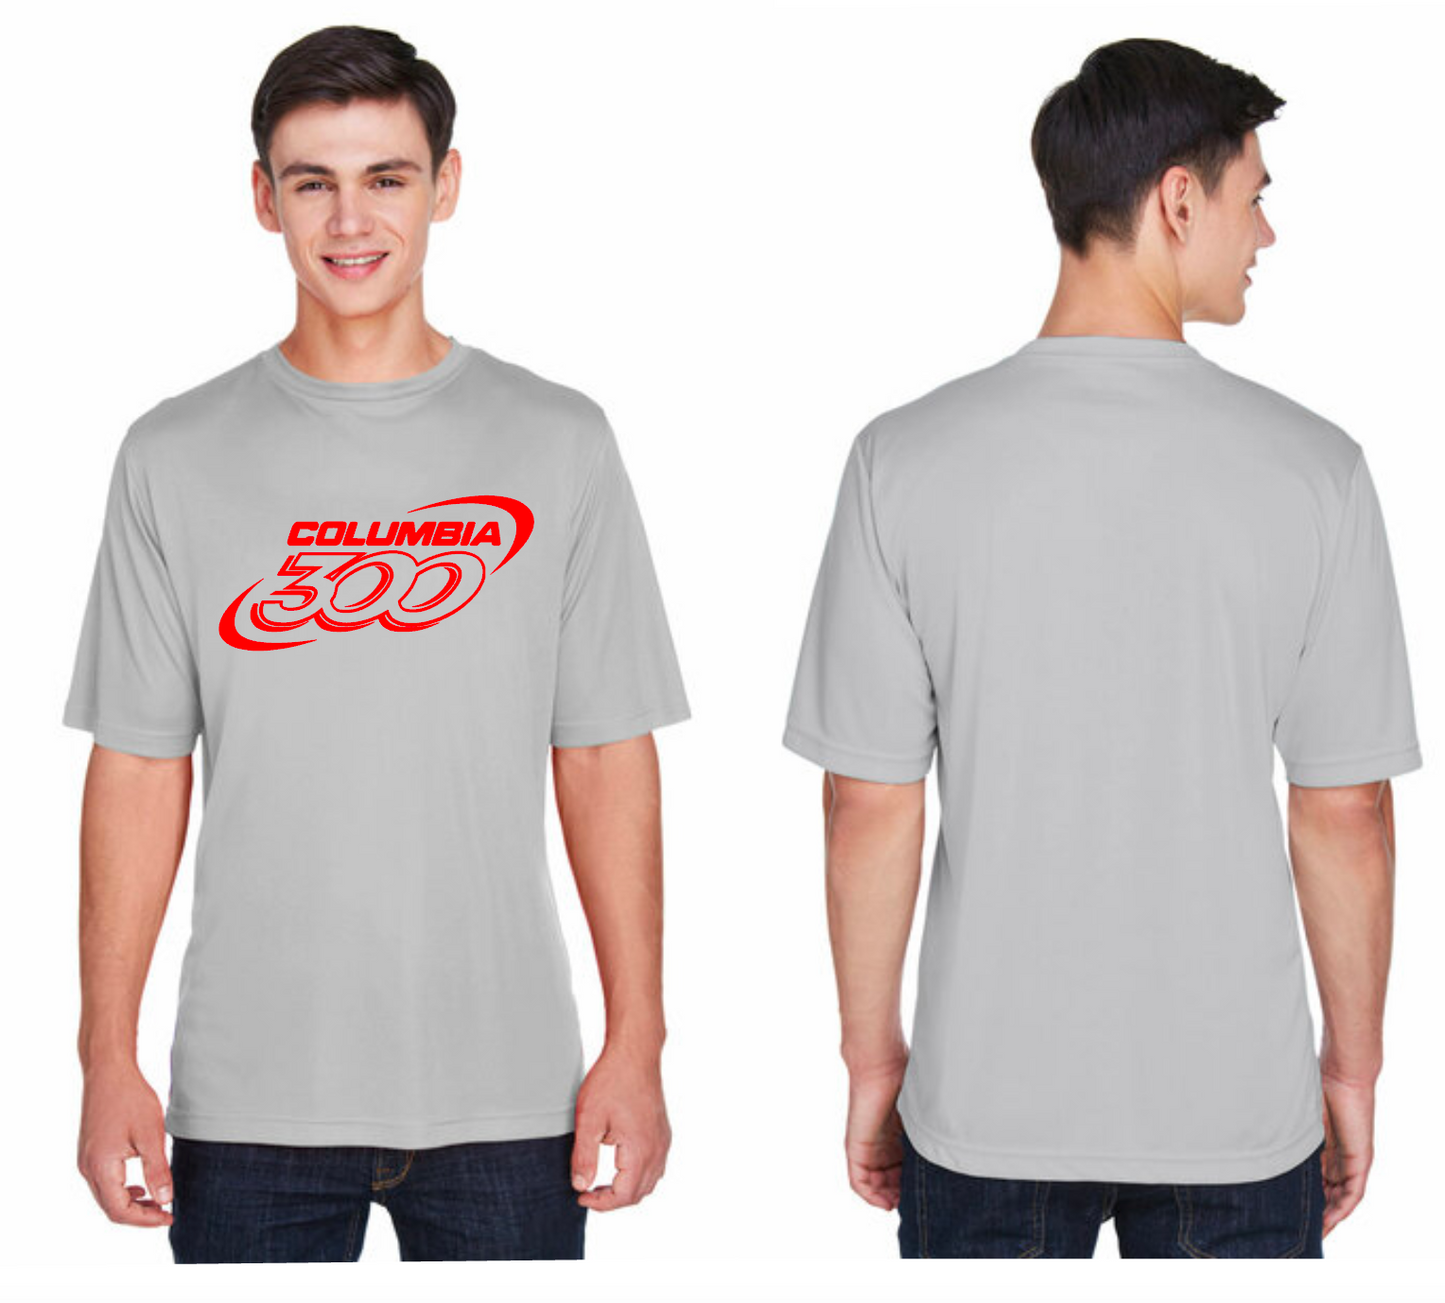 performance brand collection shirts - Columbia 300 front only